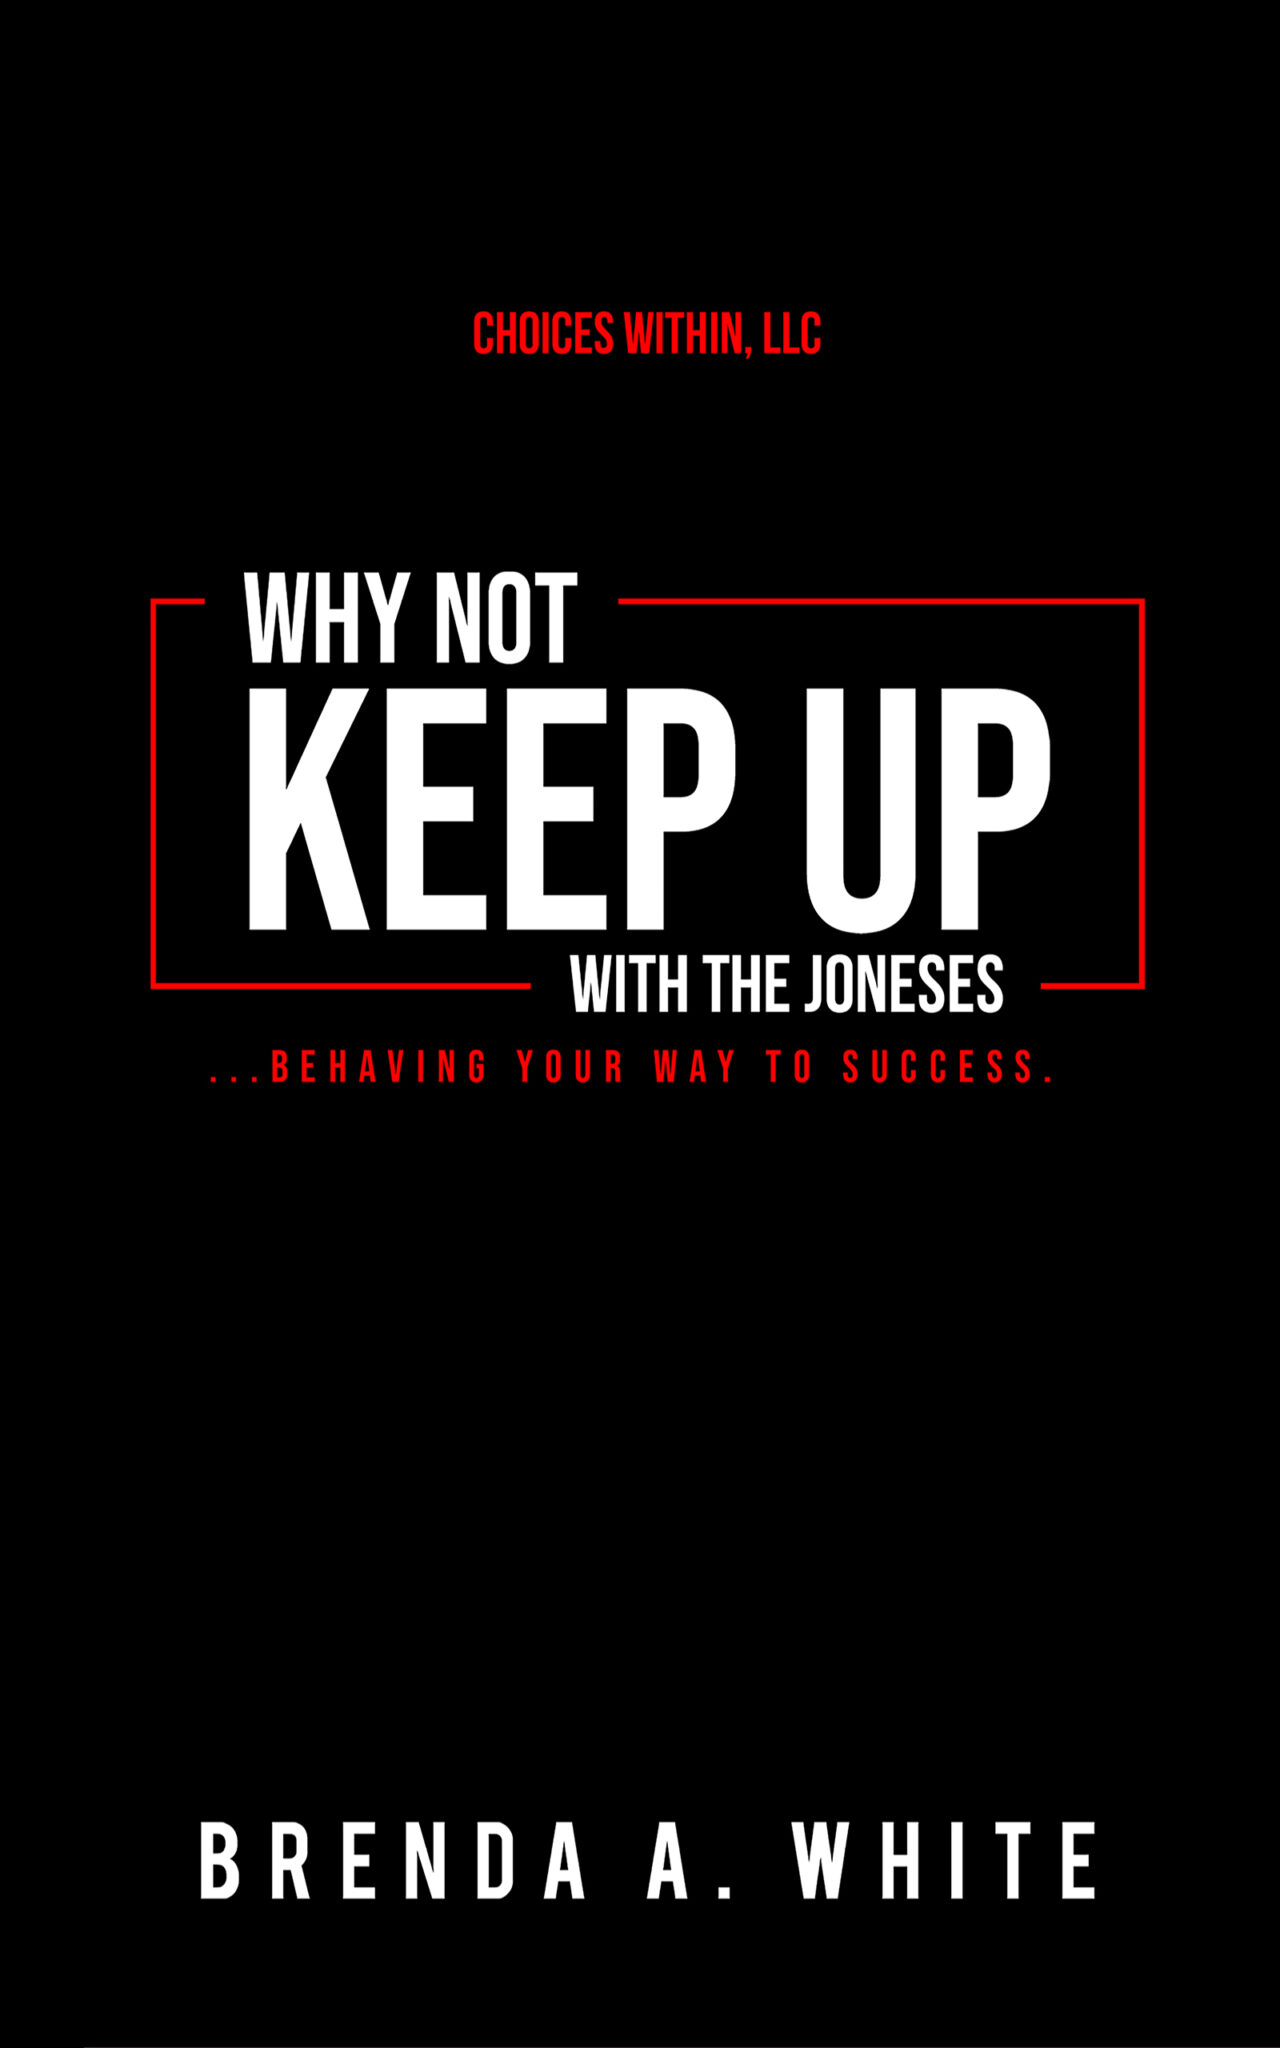 Why Not Keep Up with the Joneses – behaving your way to success